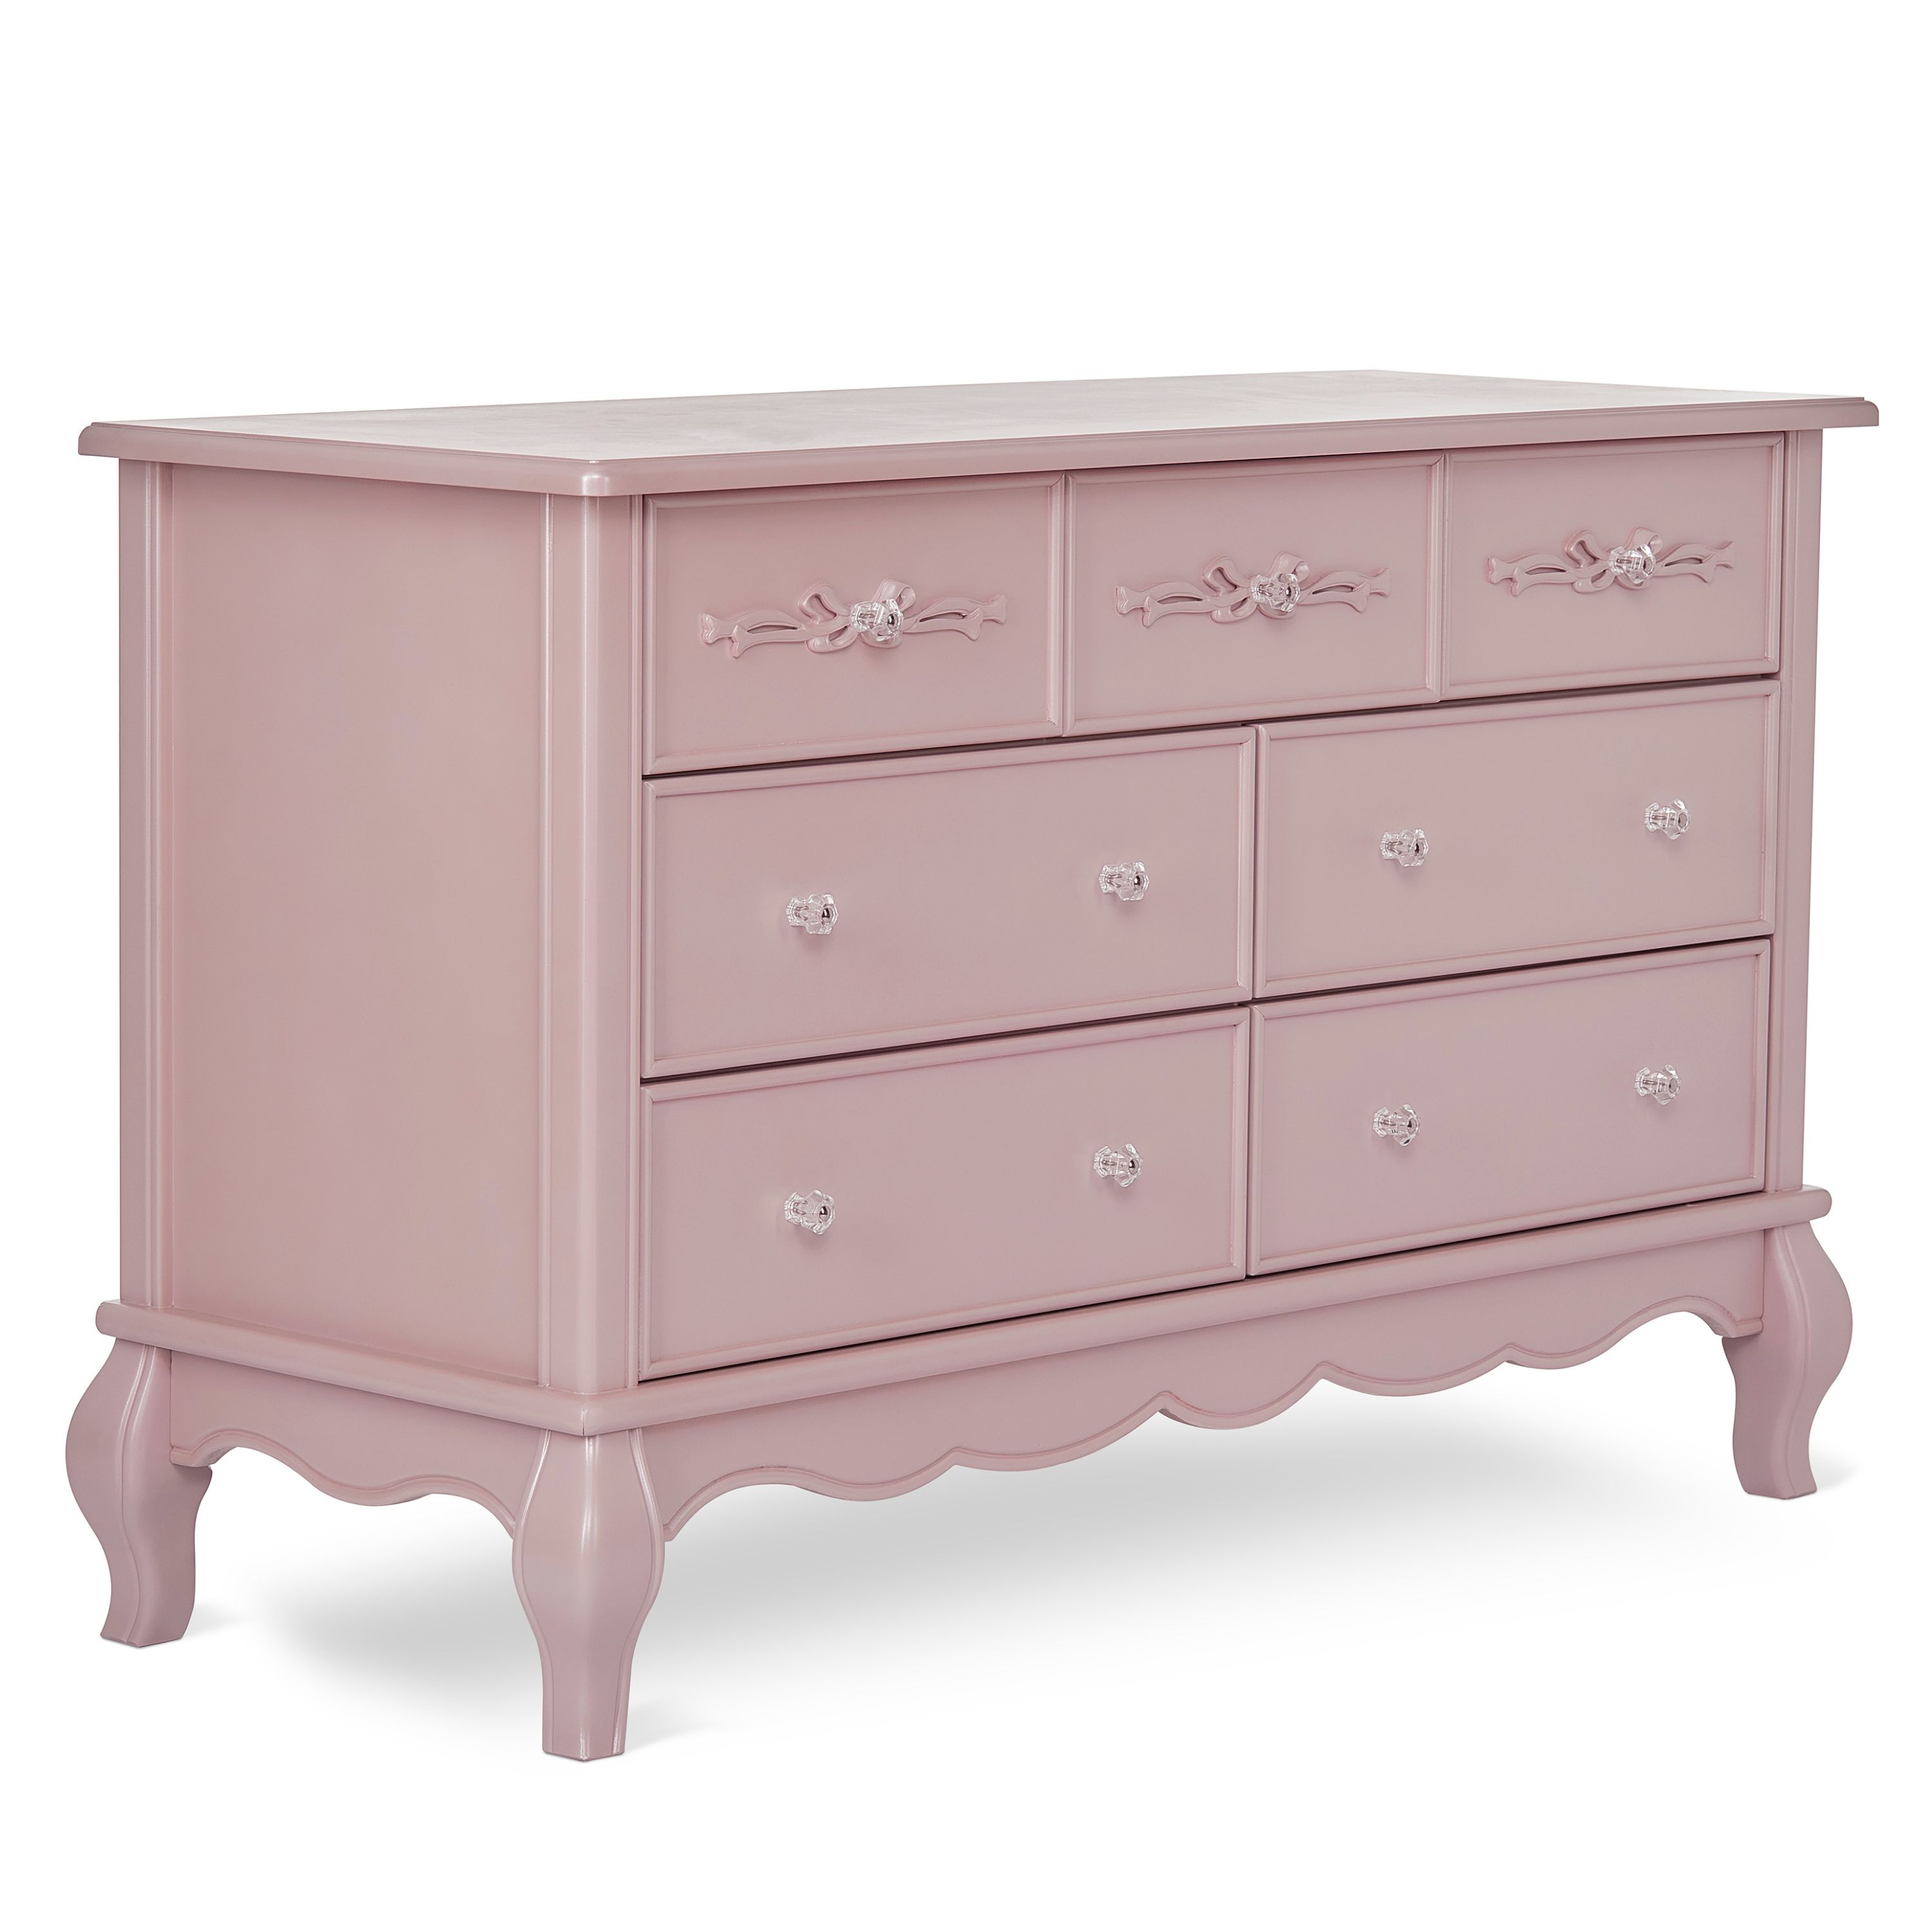 Evolur Aurora 7-Drawer Double Dresser, Dusty Rose, Spacious Drawers - image 1 of 9